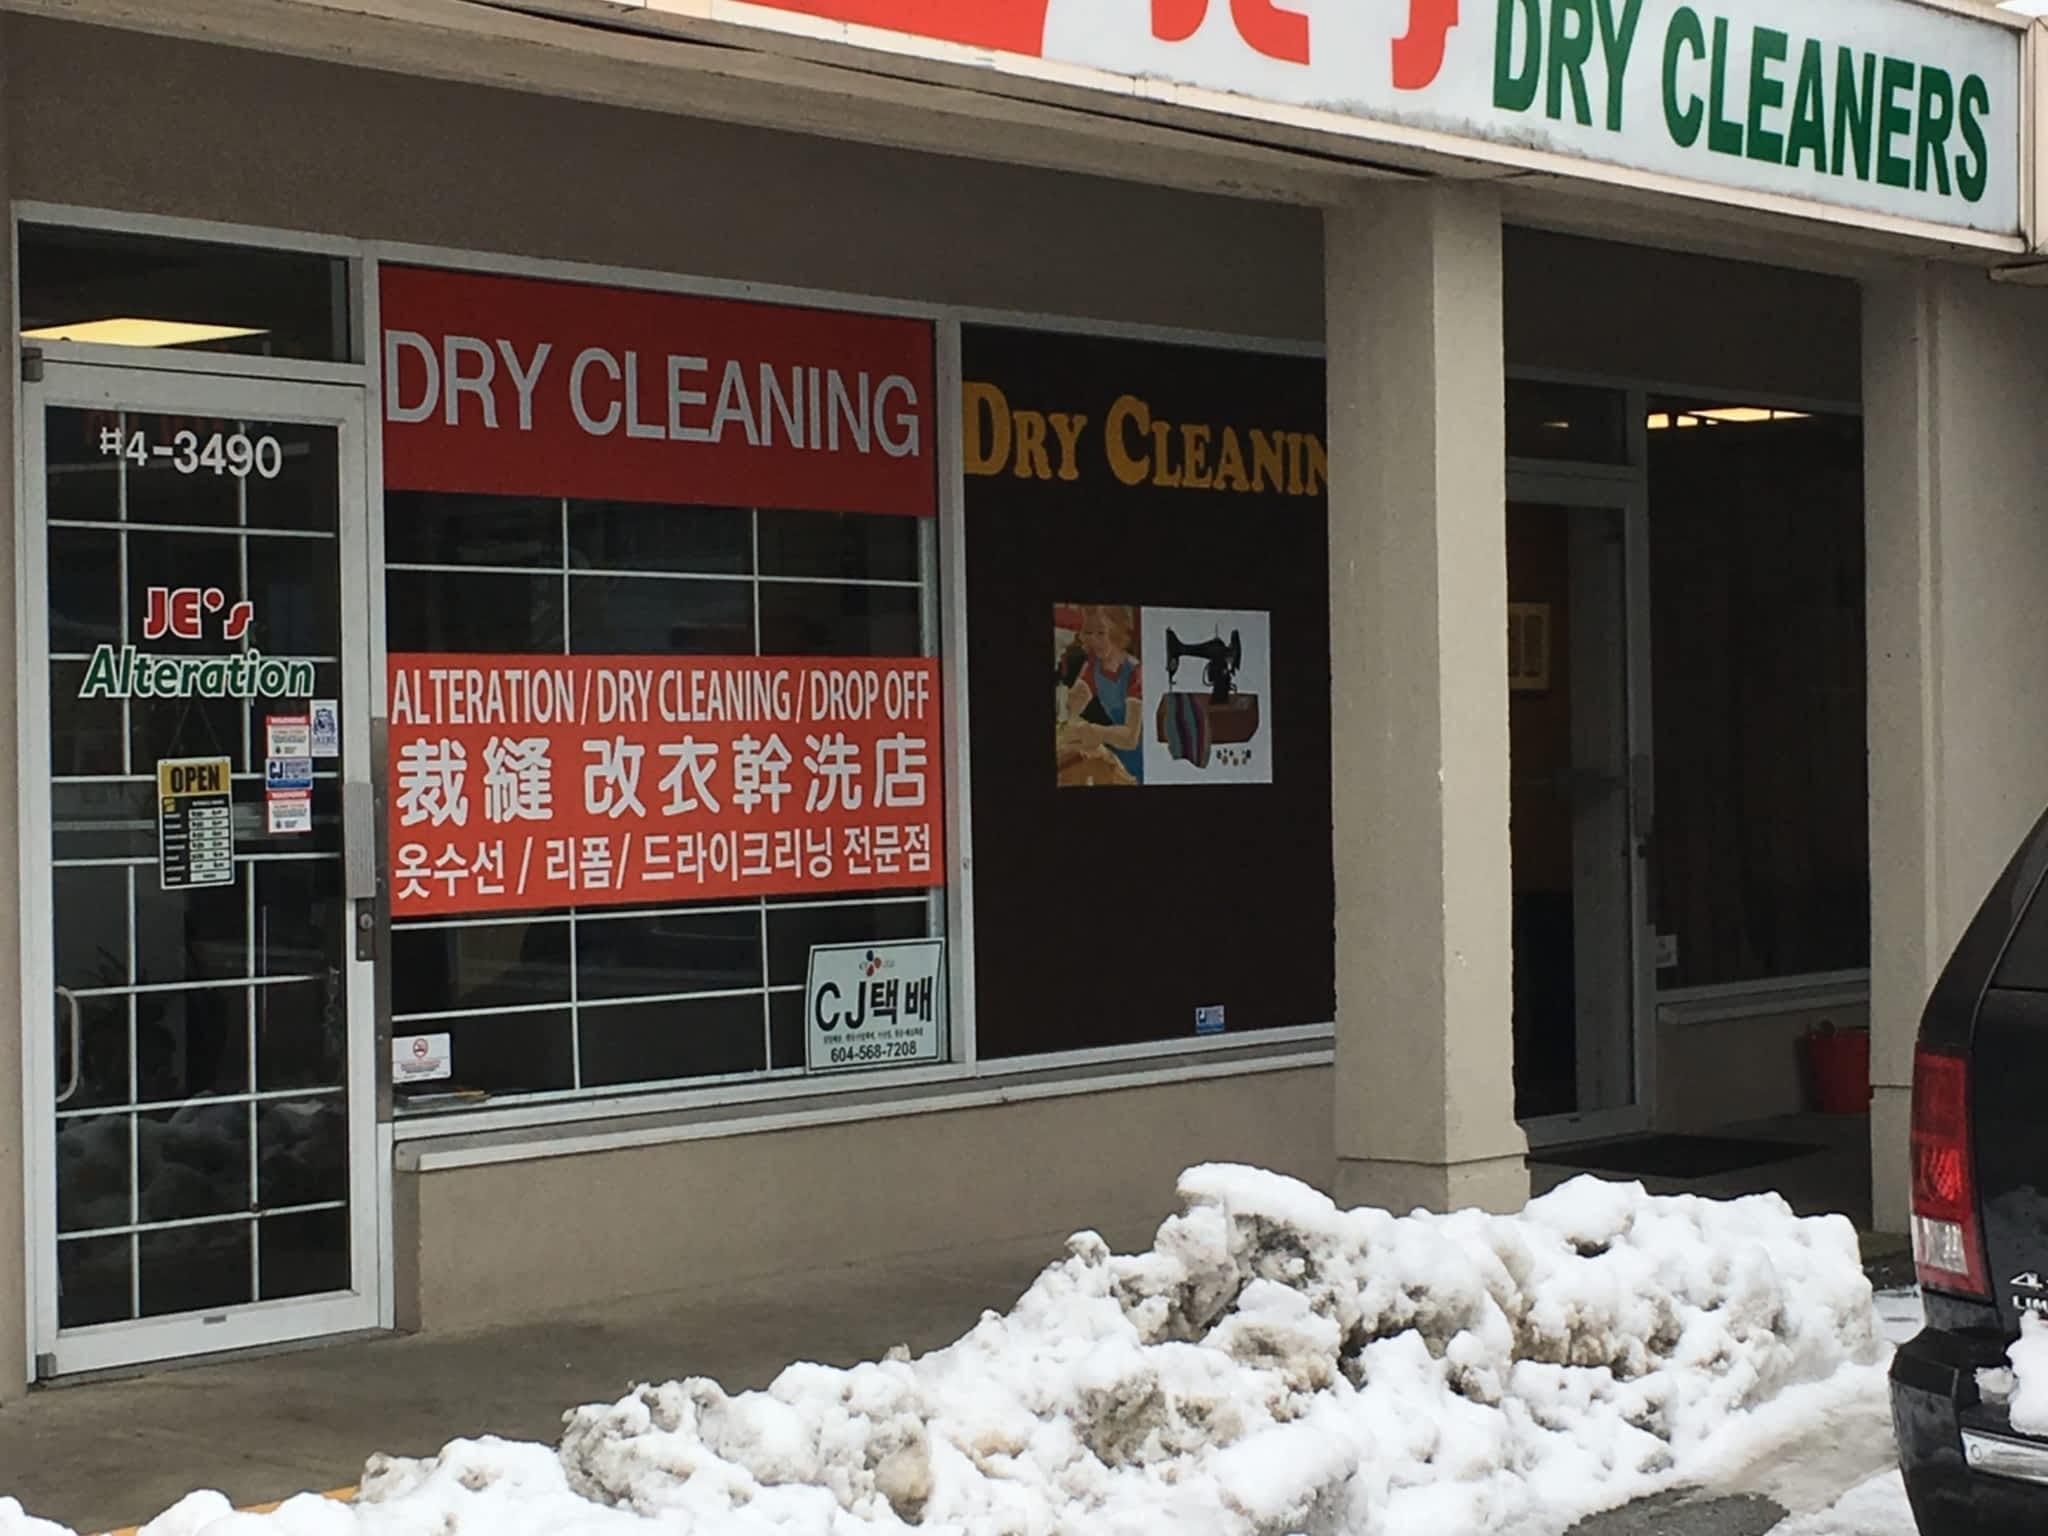 photo J E's Alteration & Dry Cleaning Drop Off